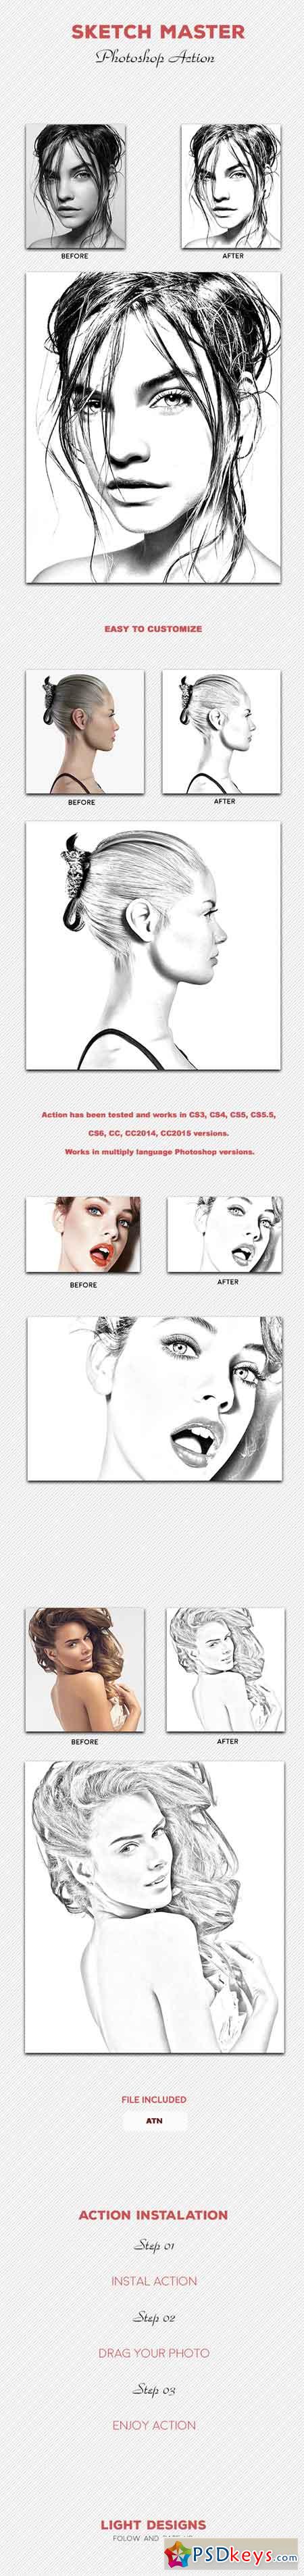 Sketch Master - Photoshop Action #03 15970140 » Free Download Photoshop